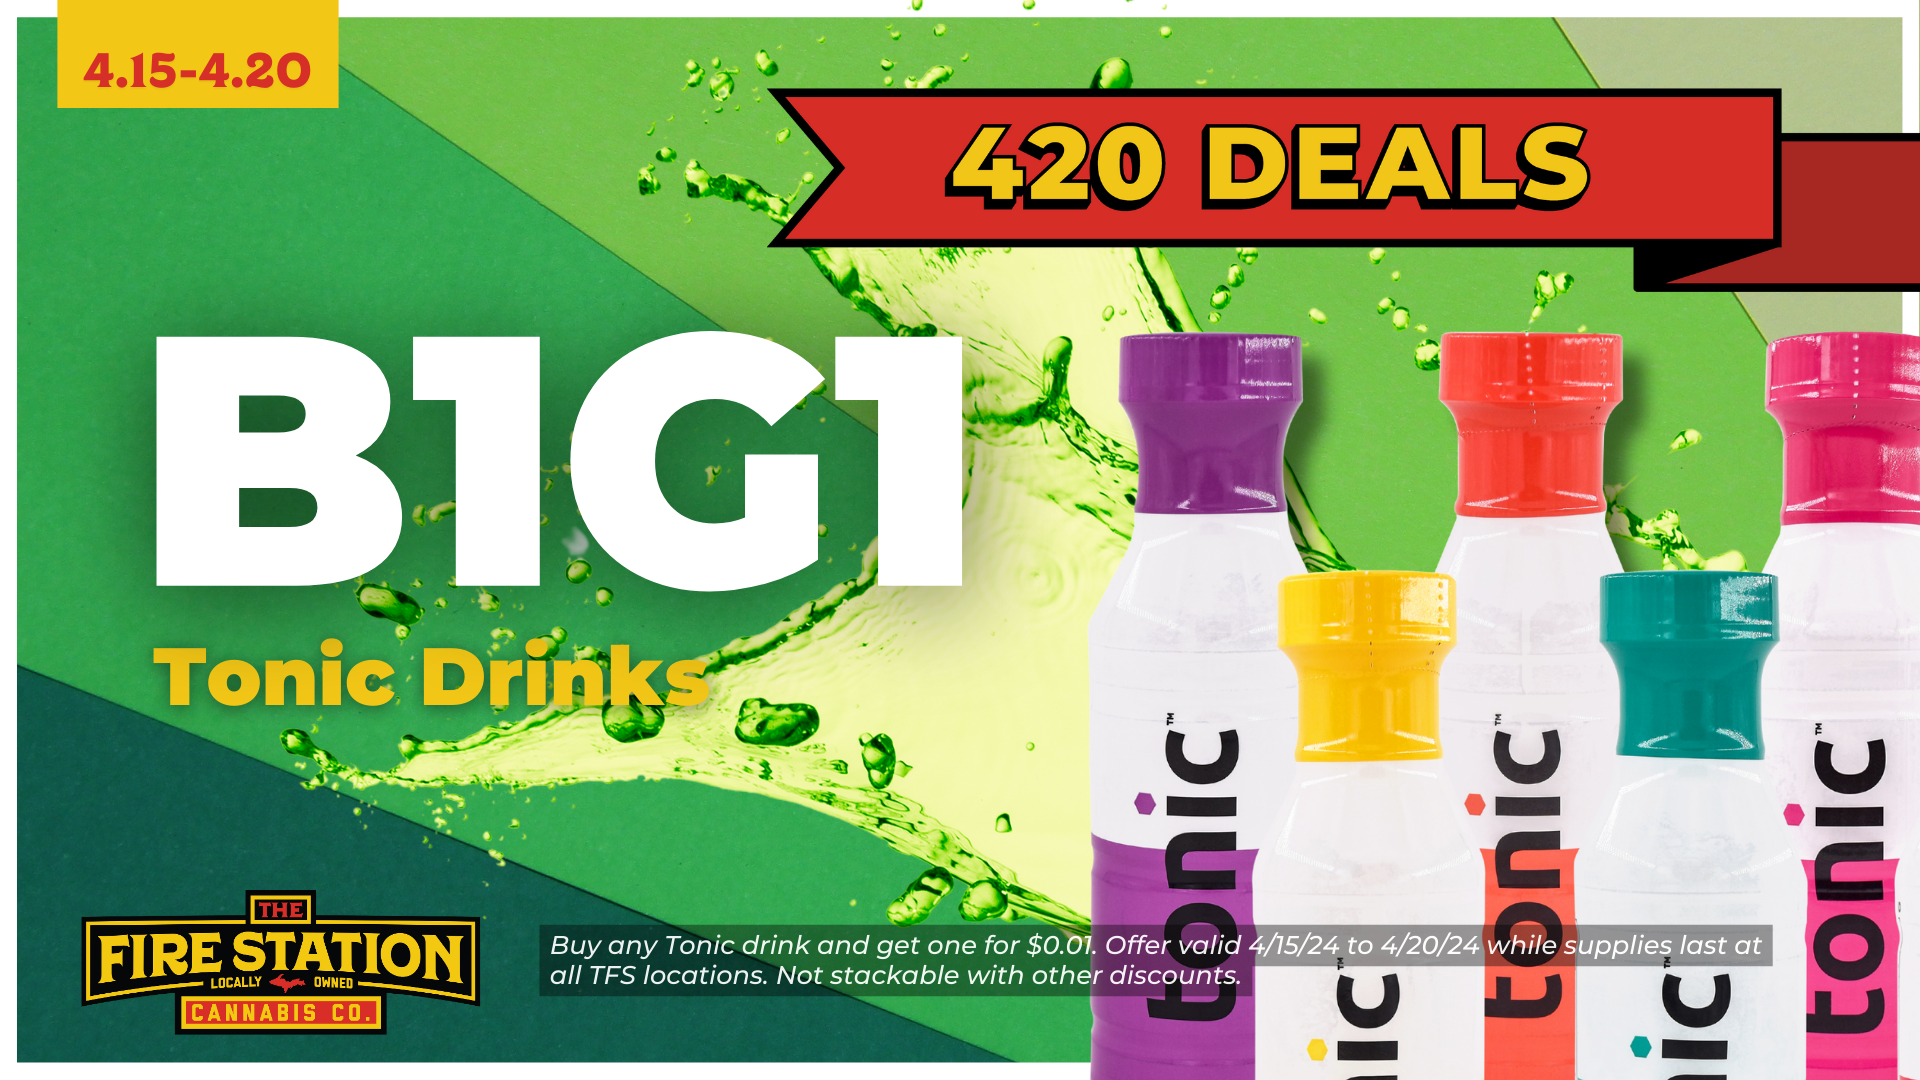 Buy any Tonic drink and get one for $0.01. Offer valid 4/15/24 to 4/20/24 while supplies last at all TFS locations. Not stackable with other discounts.